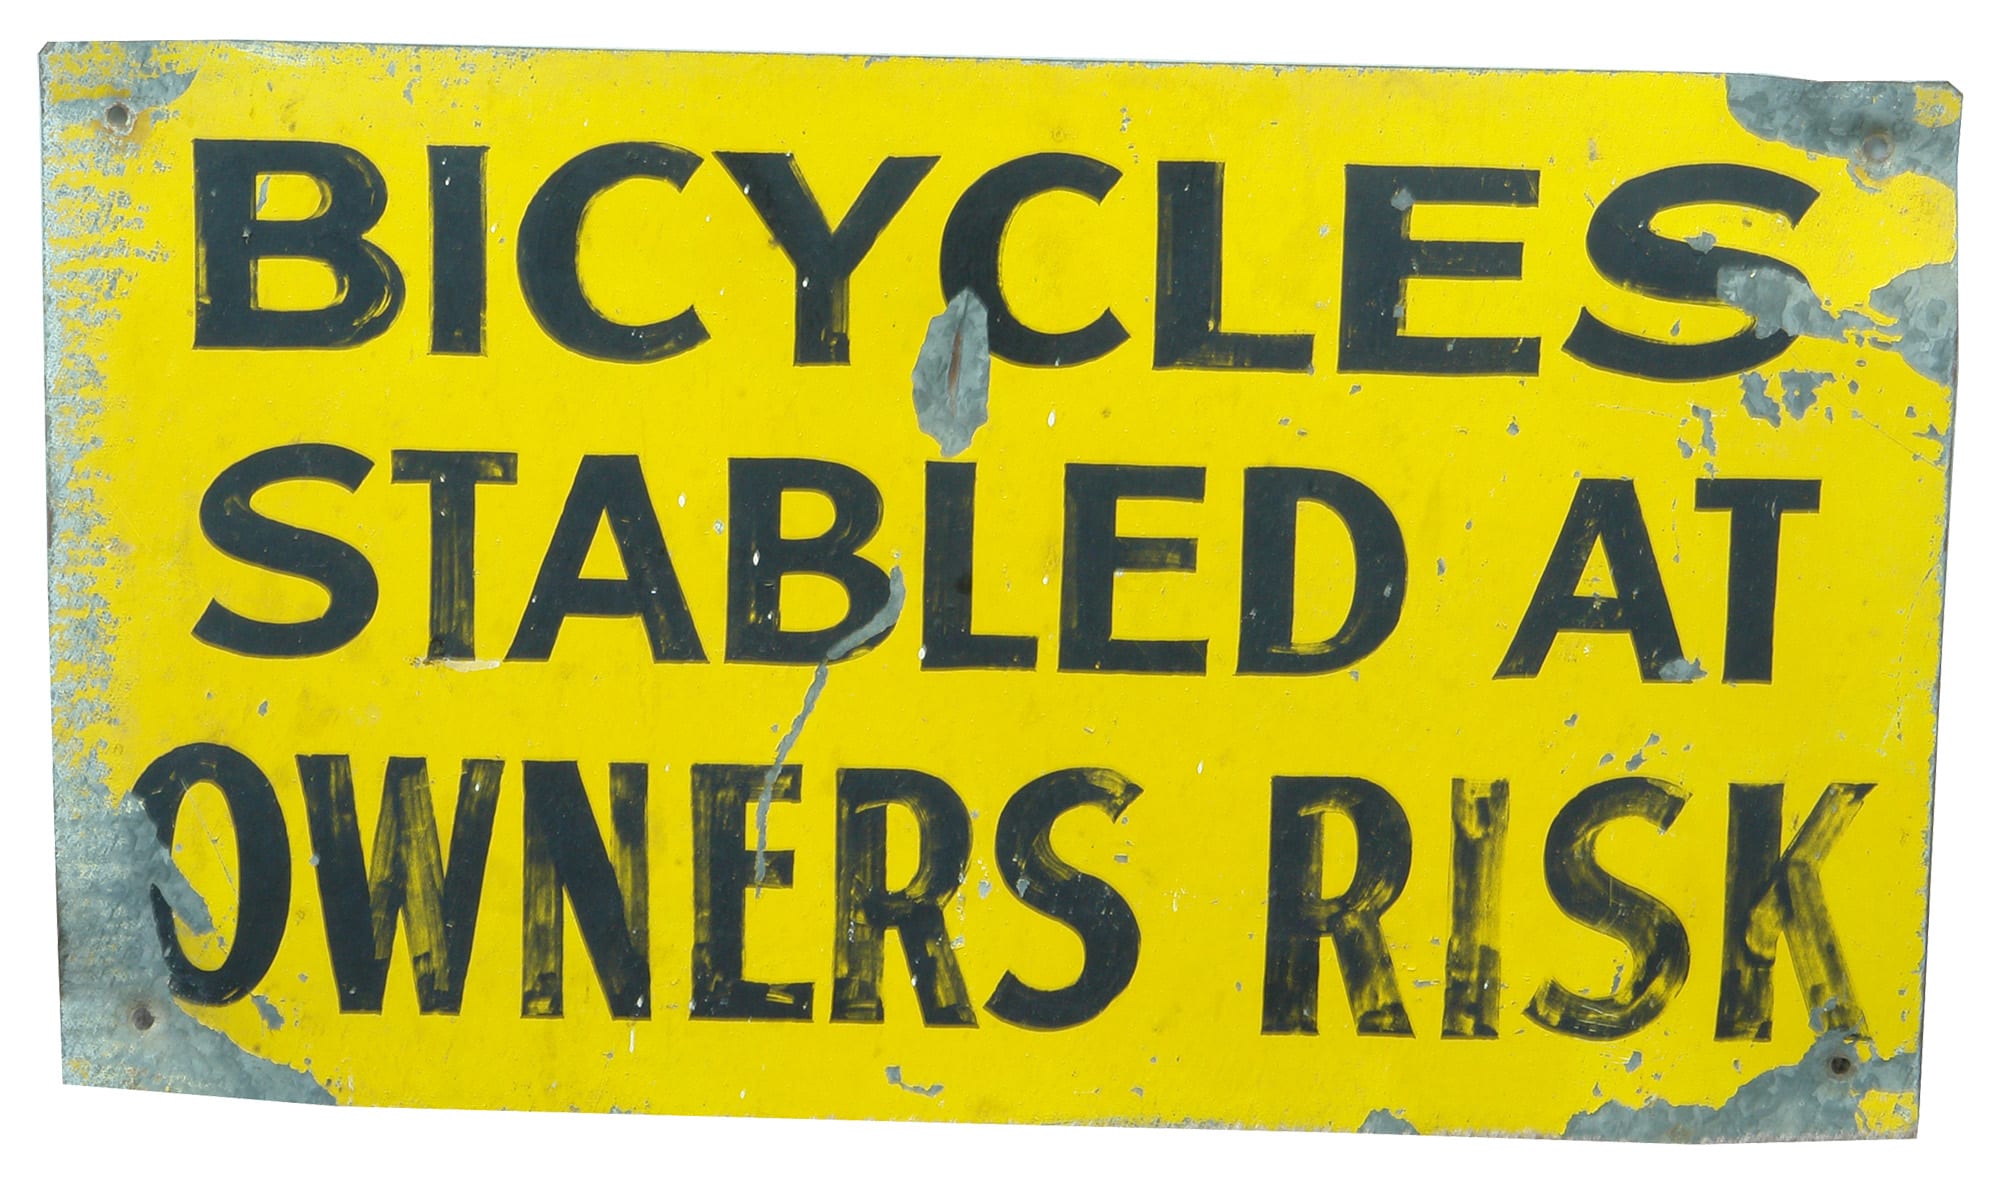 Bicycles Stabled at Owners Risk Vintage Sign